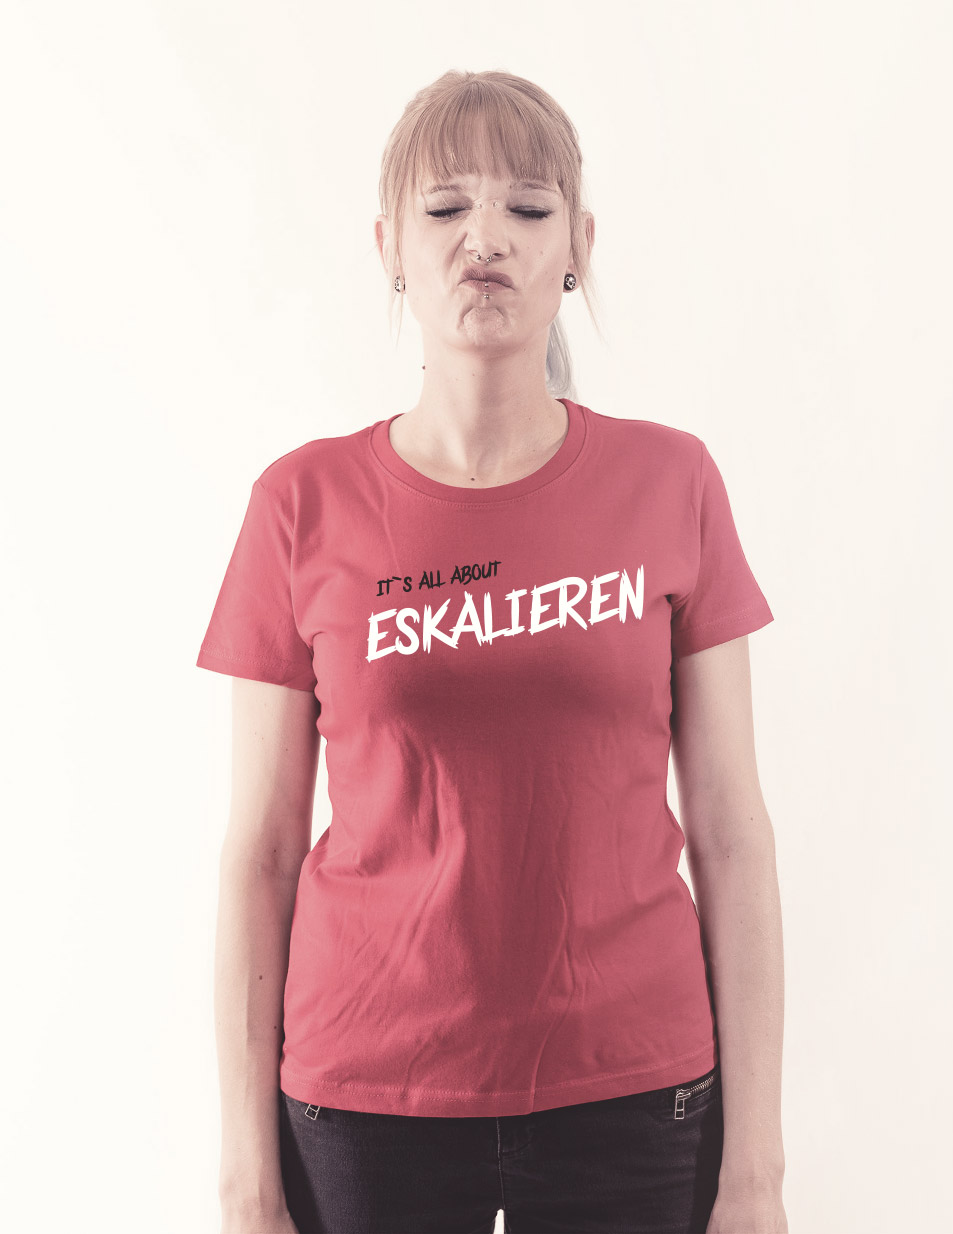 Its all about Eskalieren - Girly Shirt Pink Edition rosa